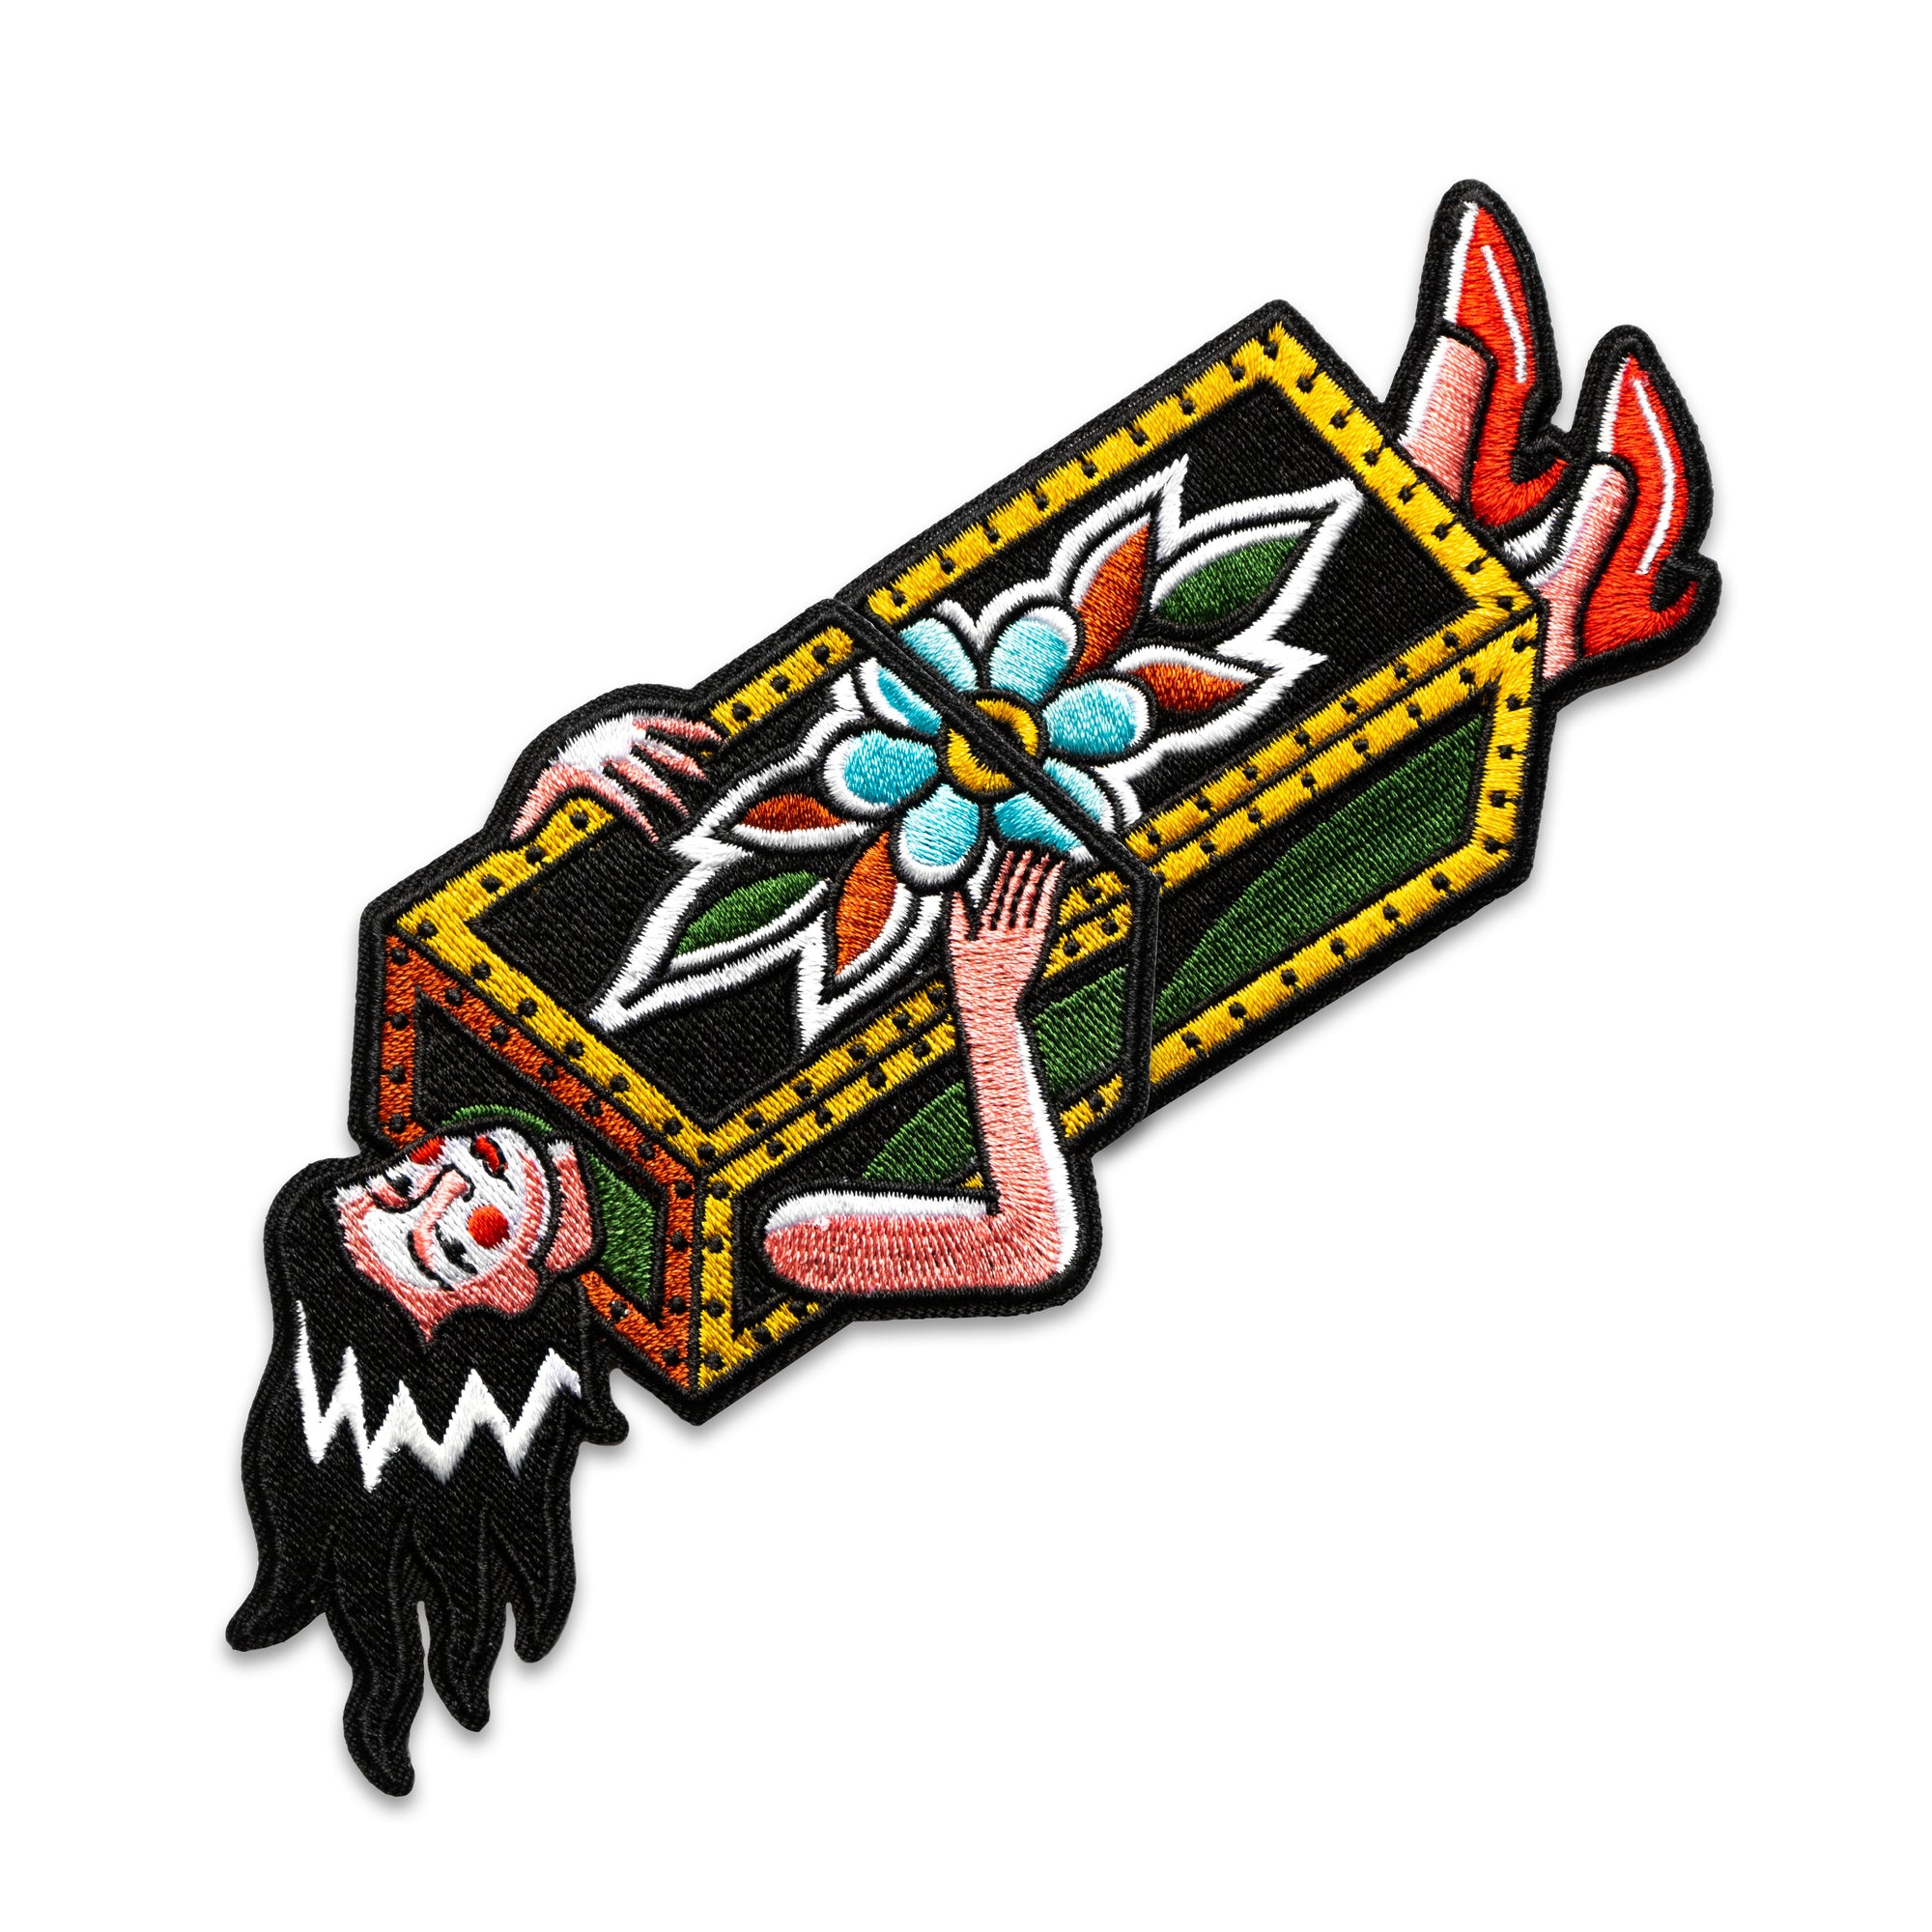 A two-part patch designed in collaboration with Brandon Ing. The iron-on patch depicts the traditional "sawing in half" magic trick. One half is woman's torso in a box, the other half is her feet. Patch is embroidered with multiple colors, and is inspired by classic tattoo flash designs.